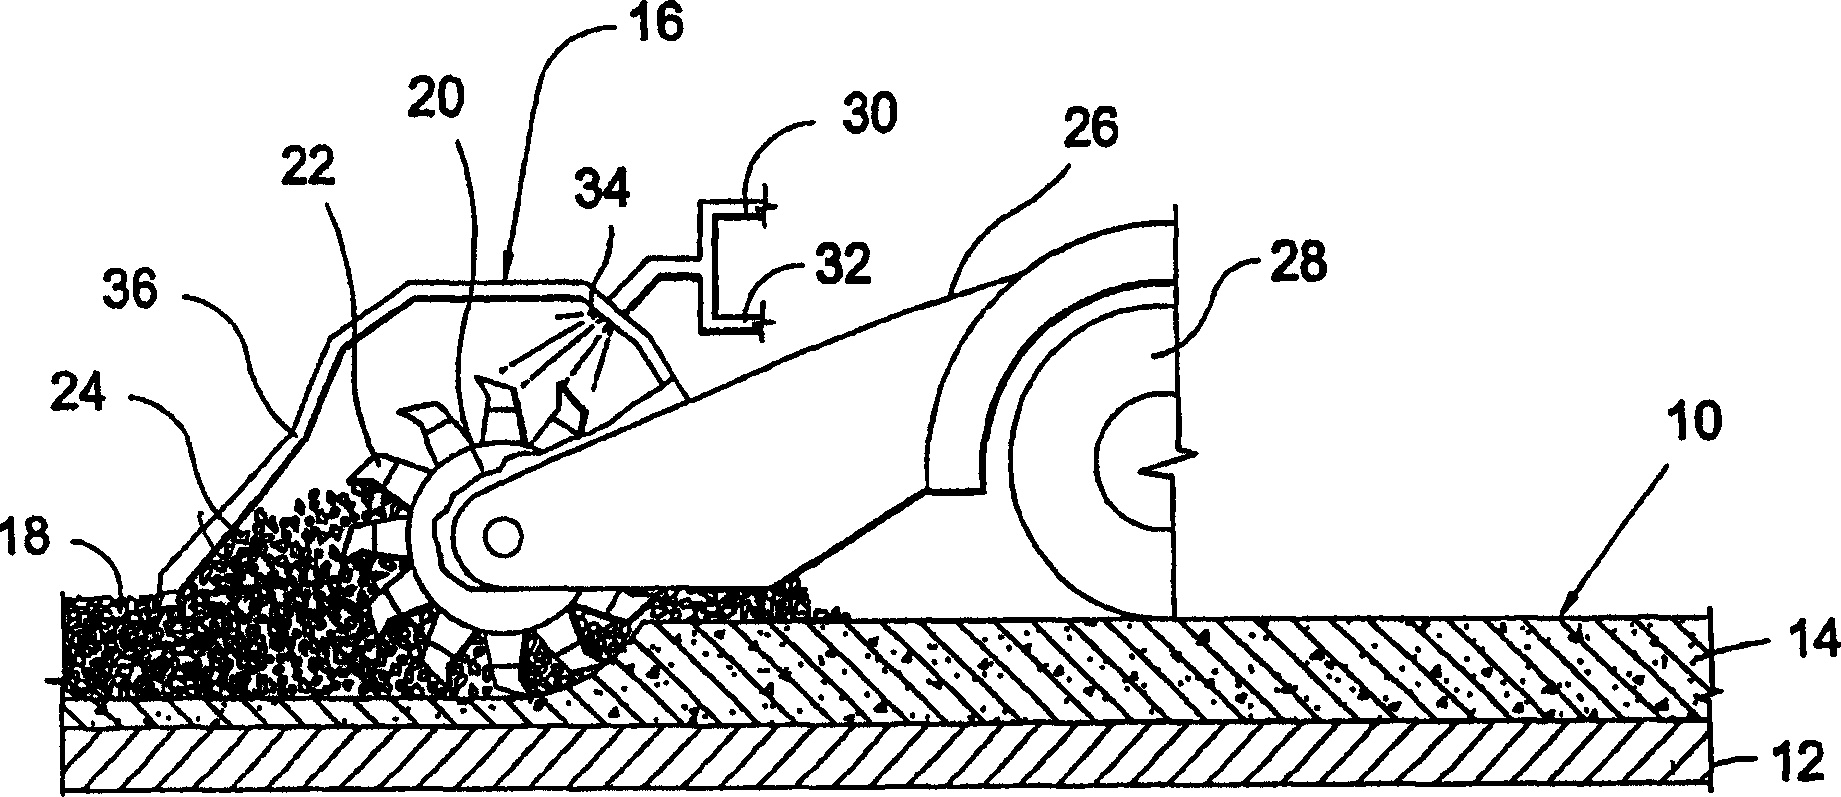 Method of upgrading gravel and/or dirt roads and a composite road resulting therefrom